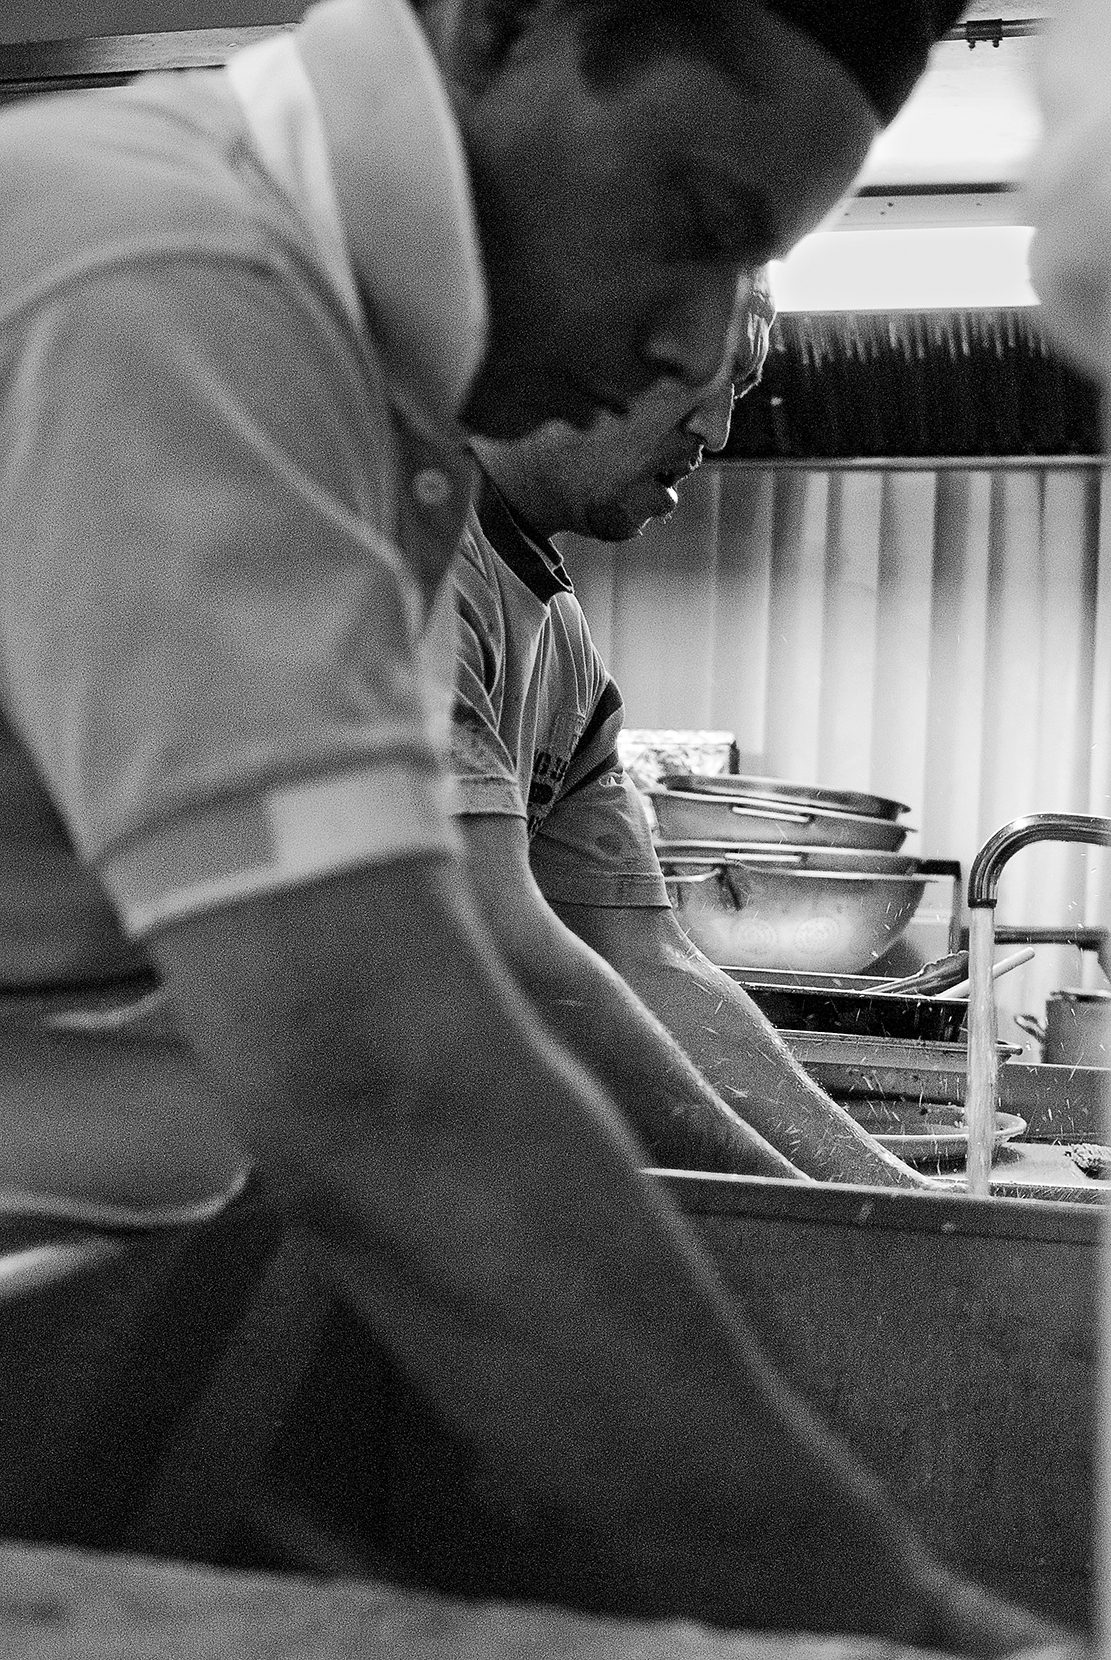 workers-washing-dishes.jpg